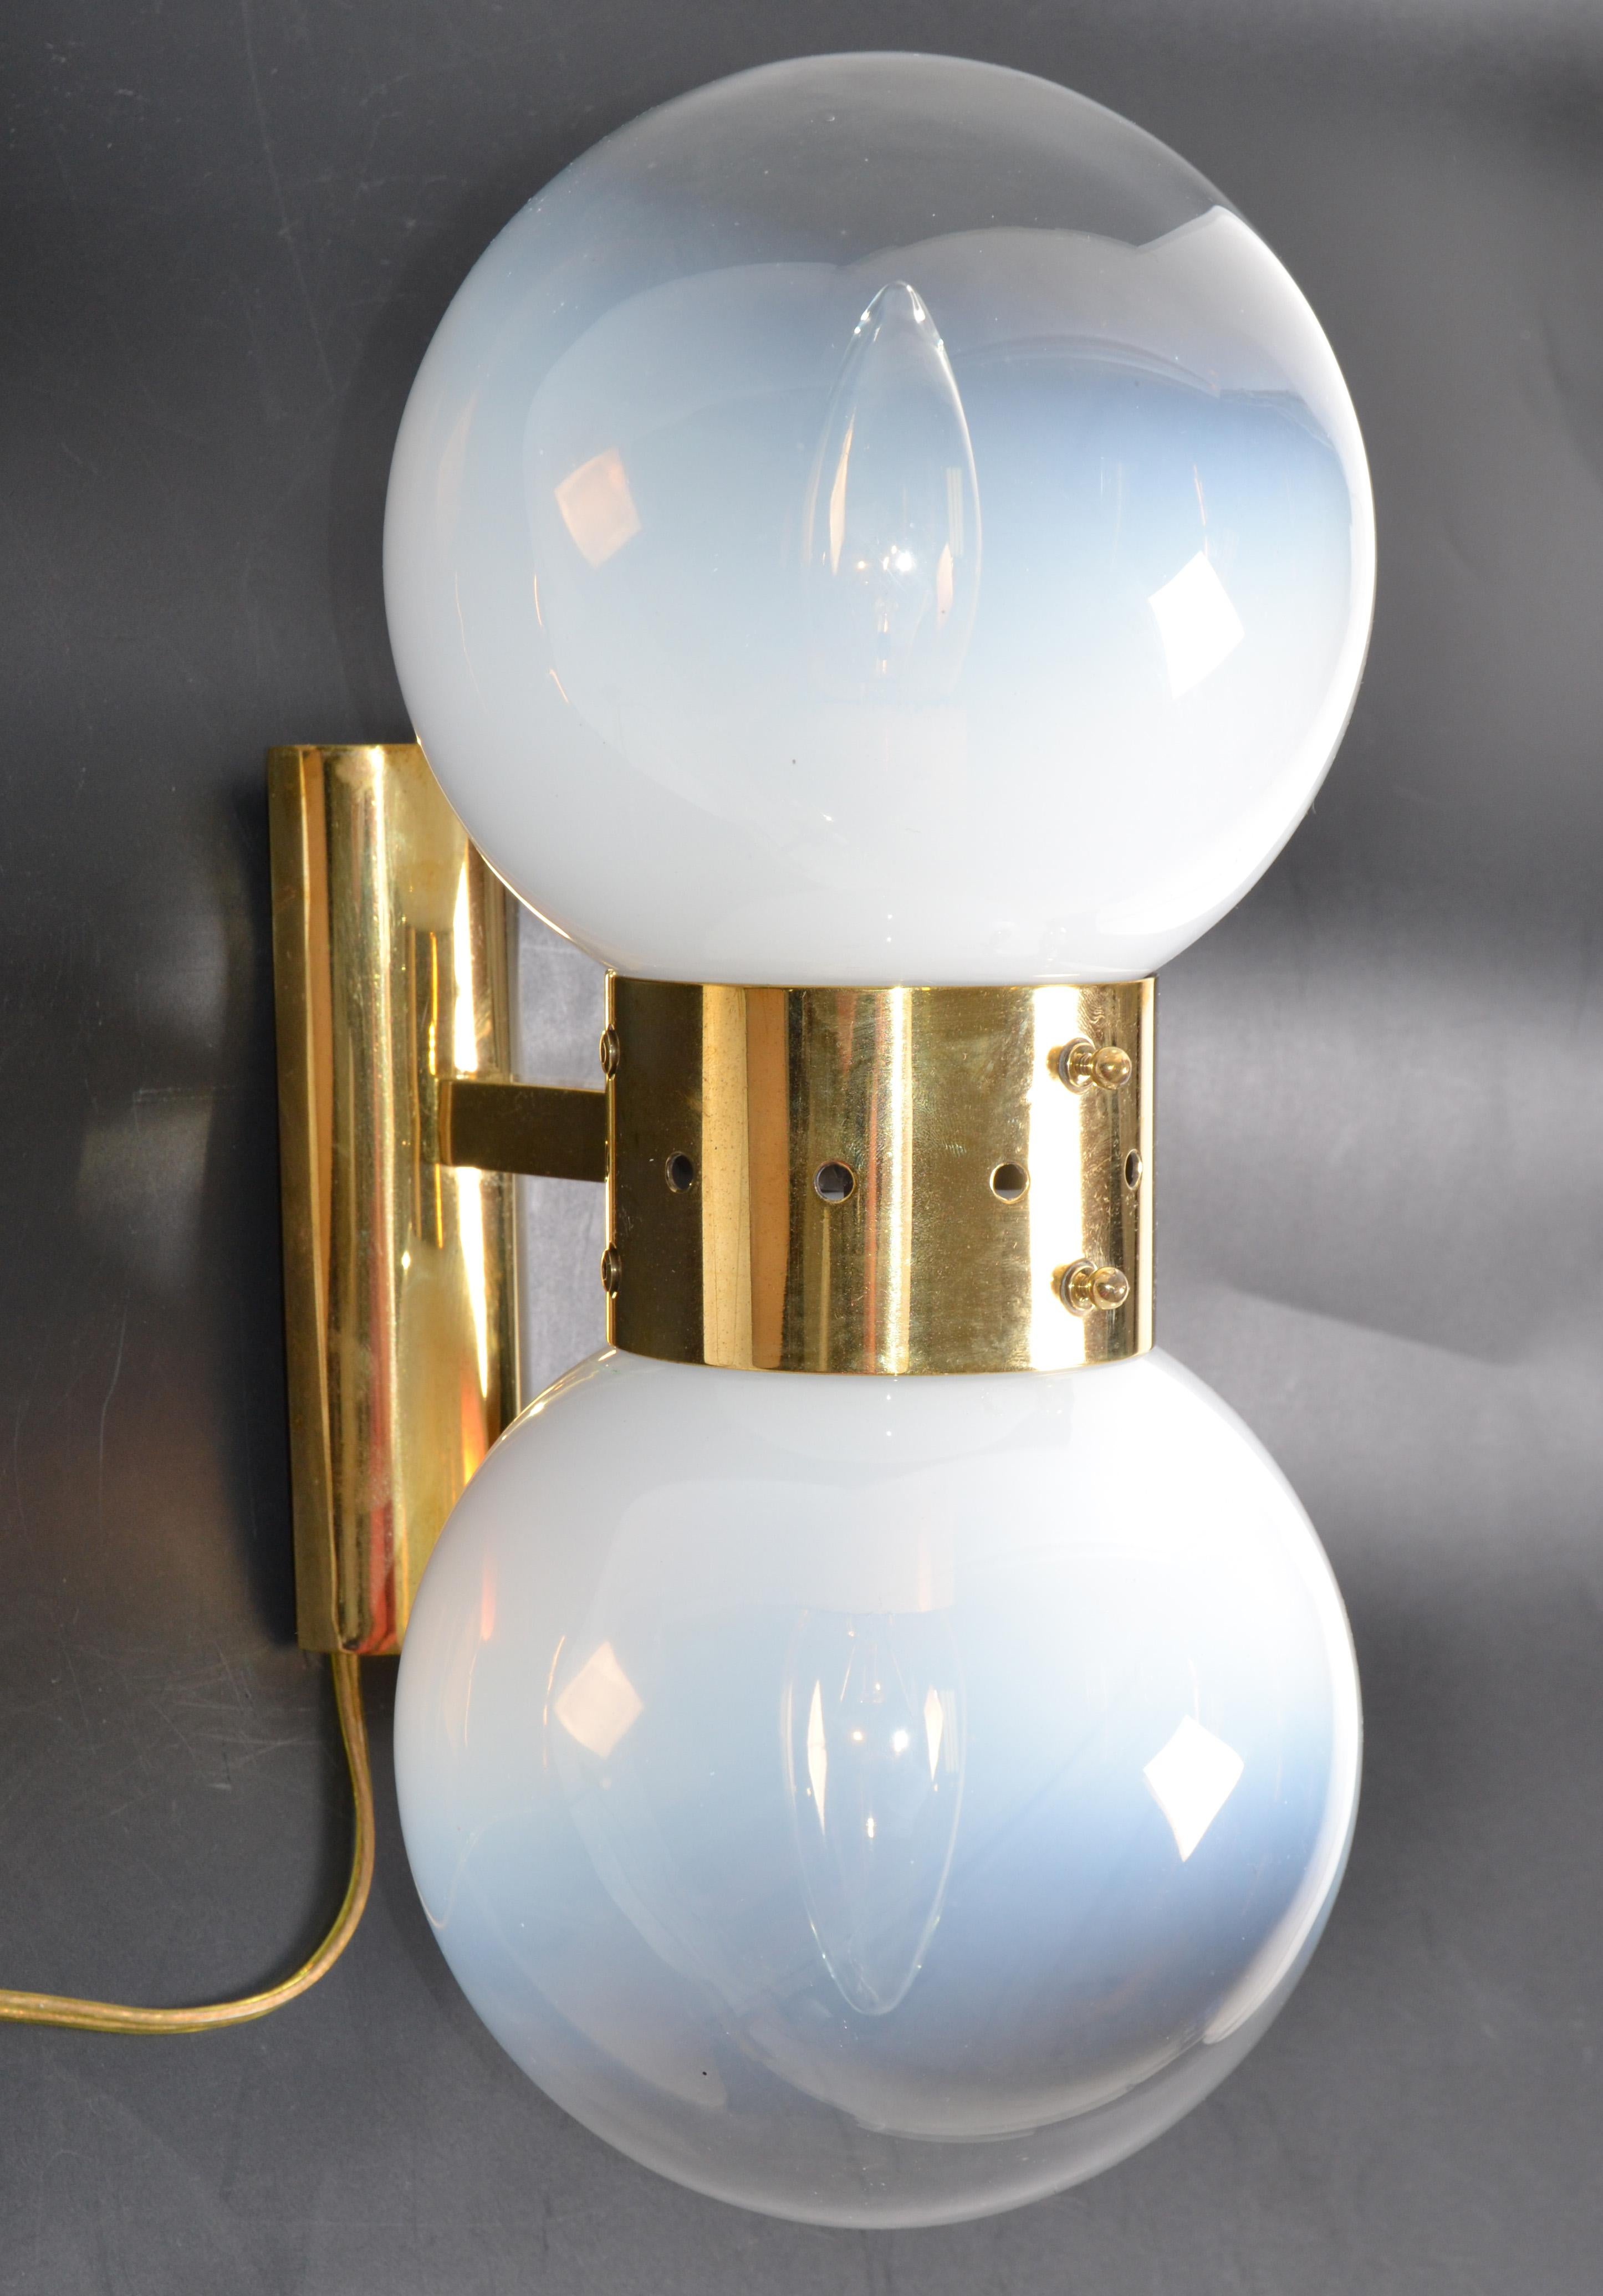 Italian Art Deco brass & blown murano glass sconces, wall lights.
Two round glass shades mounted on a polished brass frame.
In perfect working condition and each sconce takes 2 E14 light bulbs.
Brass back plate measures: 6.75 x 2 x 1